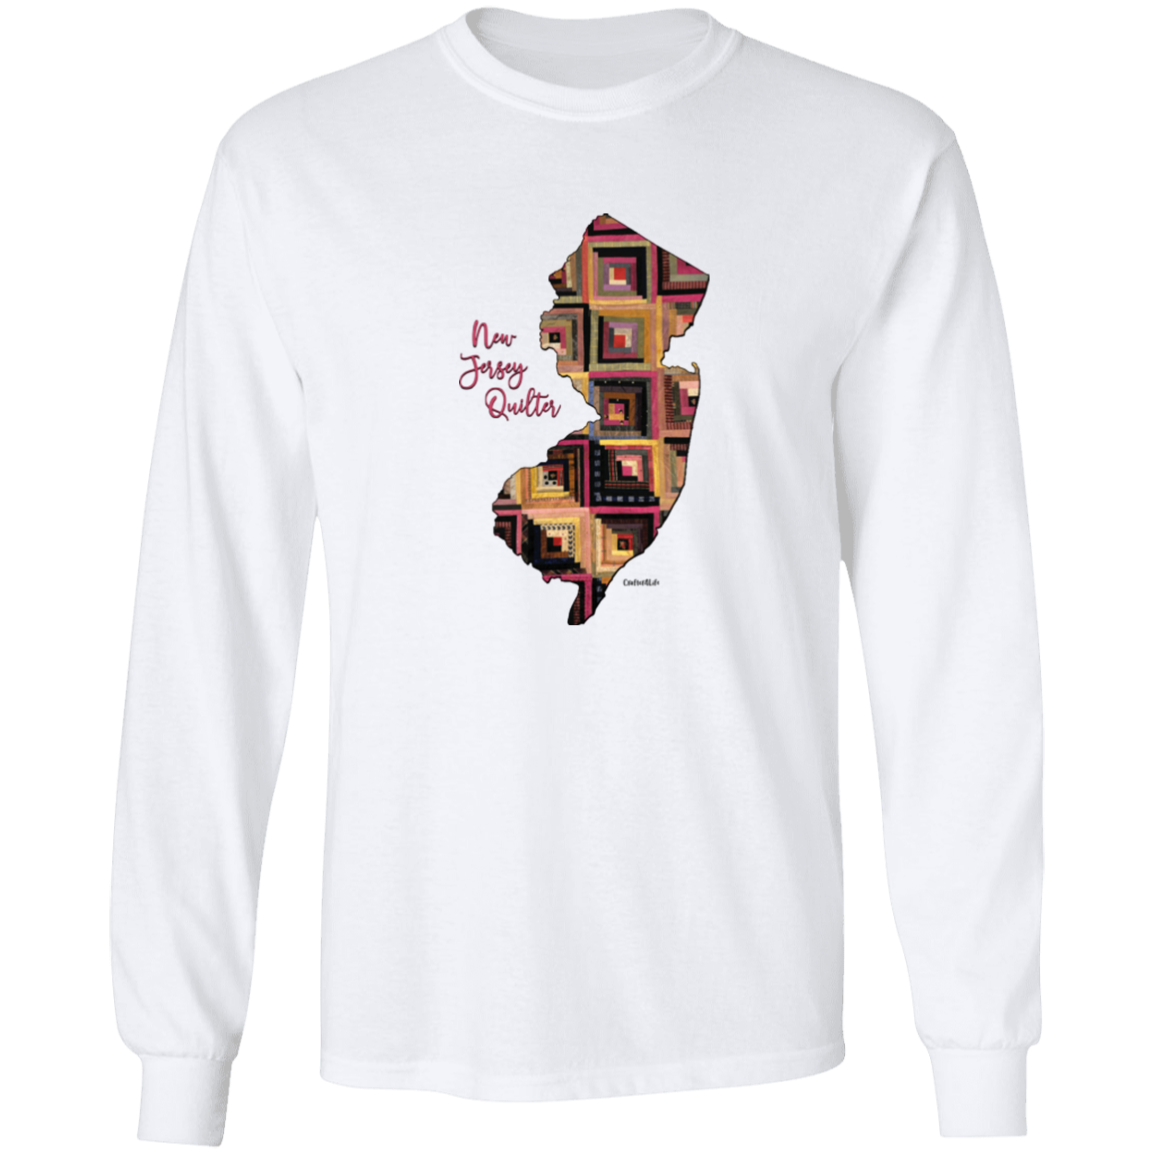 New Jersey Quilter Long Sleeve T-Shirt, Gift for Quilting Friends and Family